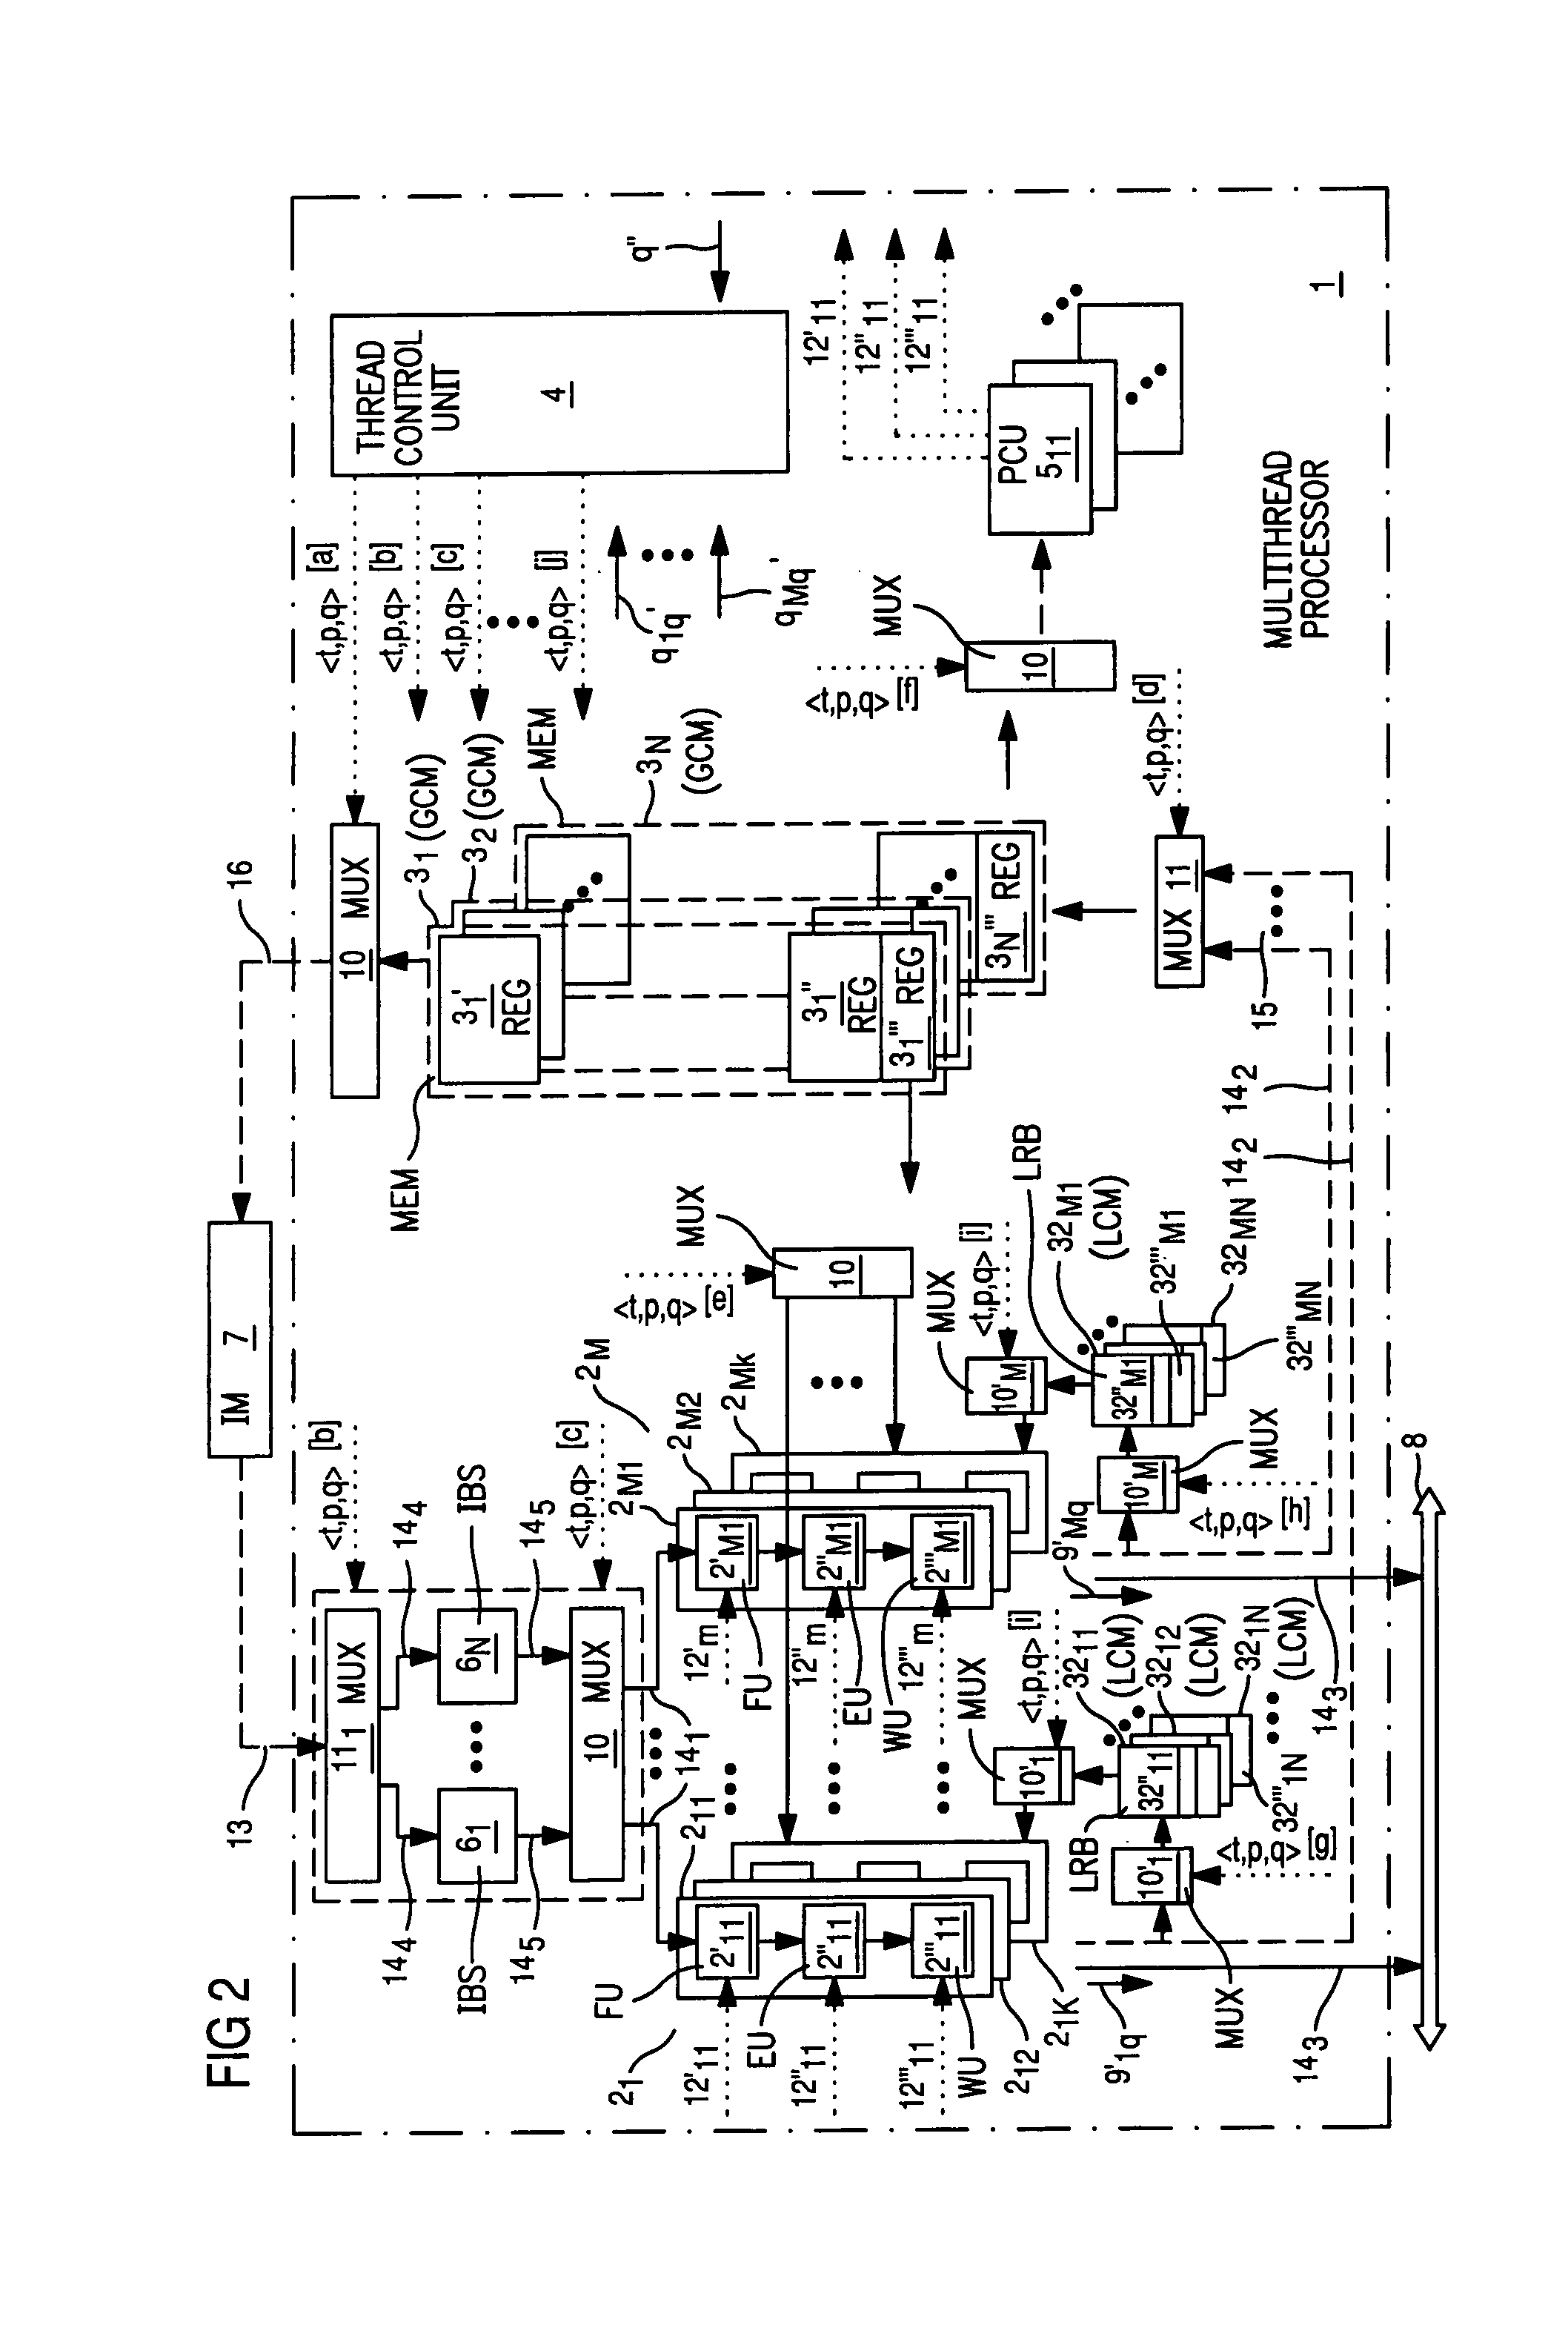 Heterogeneous parallel multithread processor (HPMT) with local context memory sets for respective processor type groups and global context memory